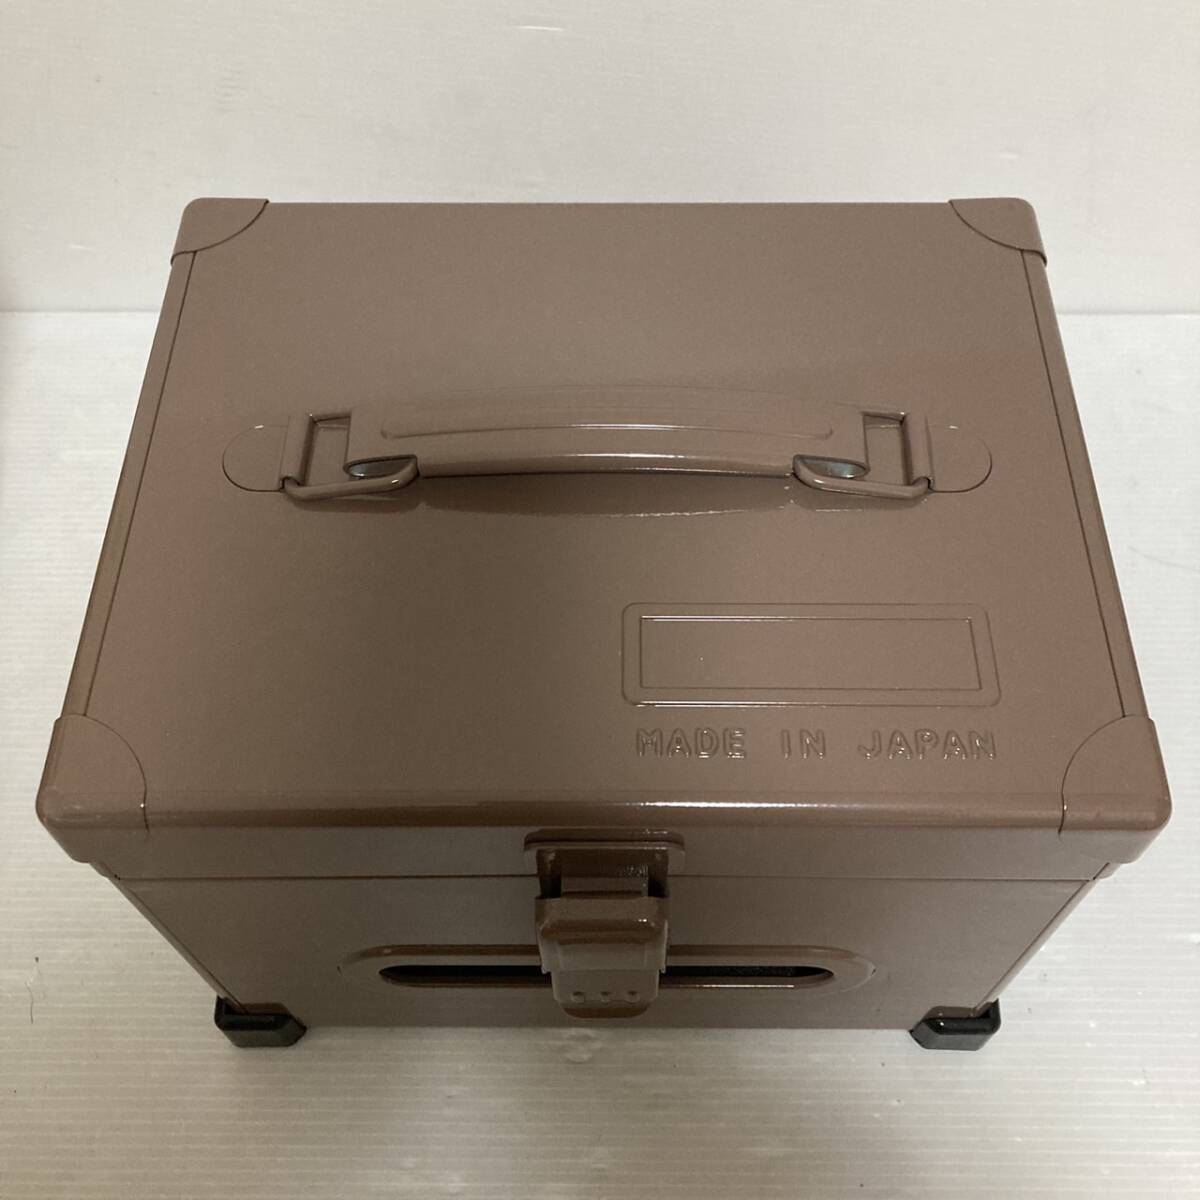  unused goods ....BOX small .. .. shop made in Japan steel made storage box case Brown pet accessories dog cat /Y032-37